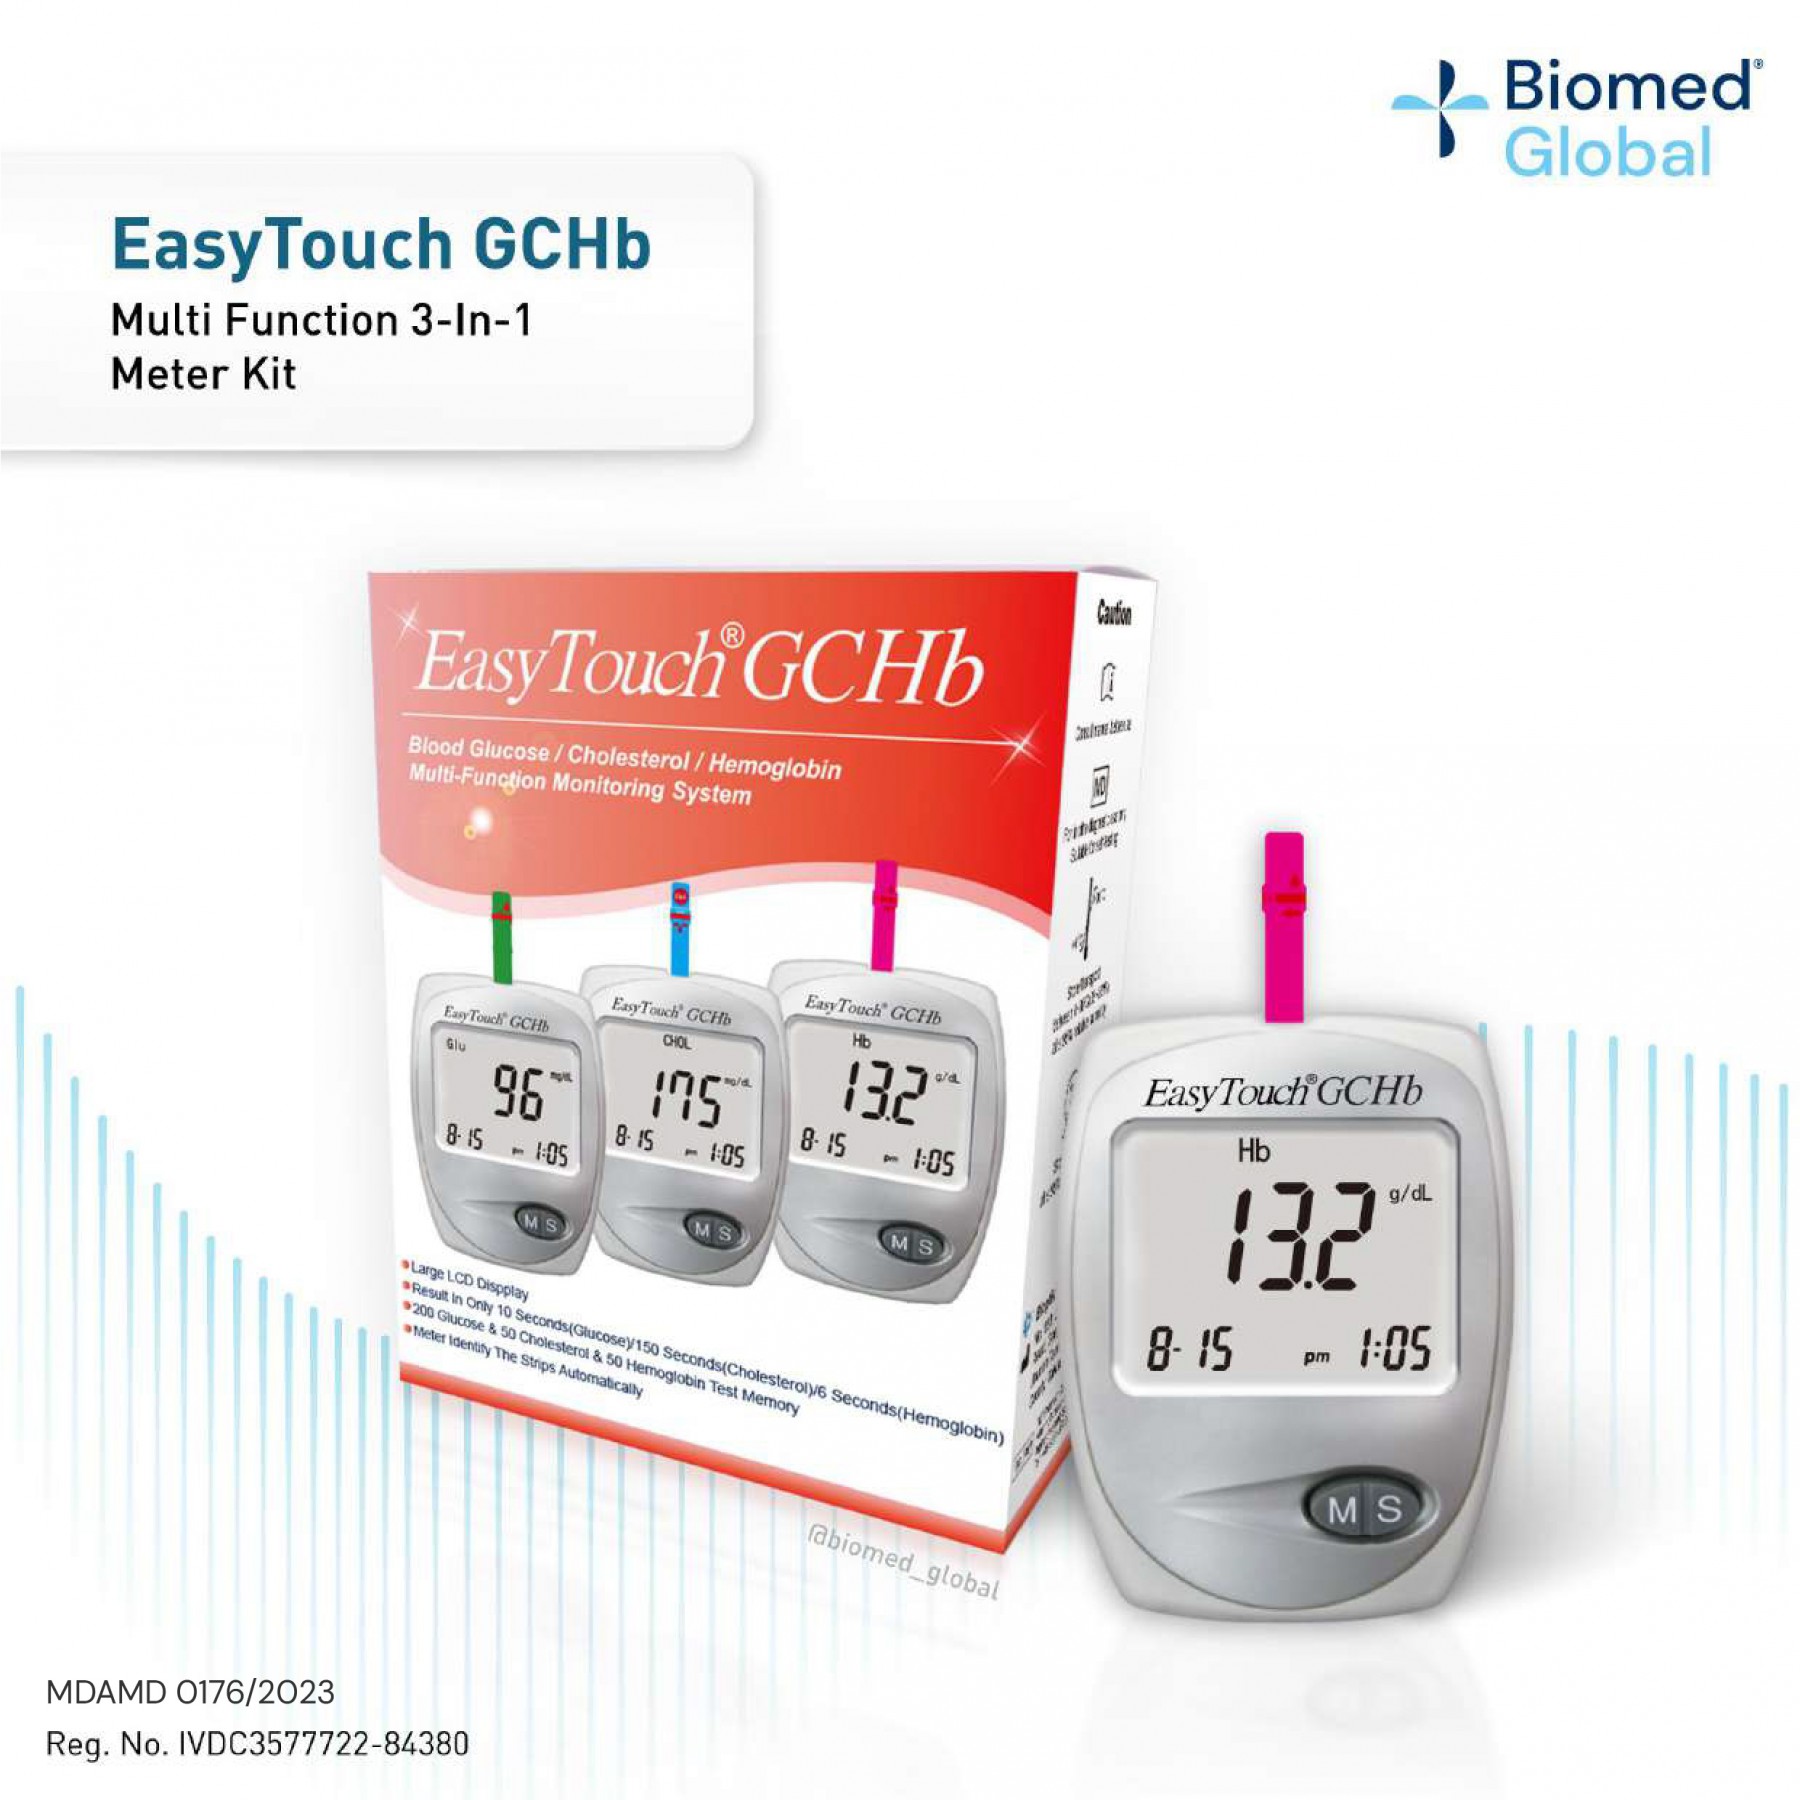 EasyTouch GCHb 3-in-1 Blood Glucose, Cholesterol and Hemoglobin Meter Complete Kit